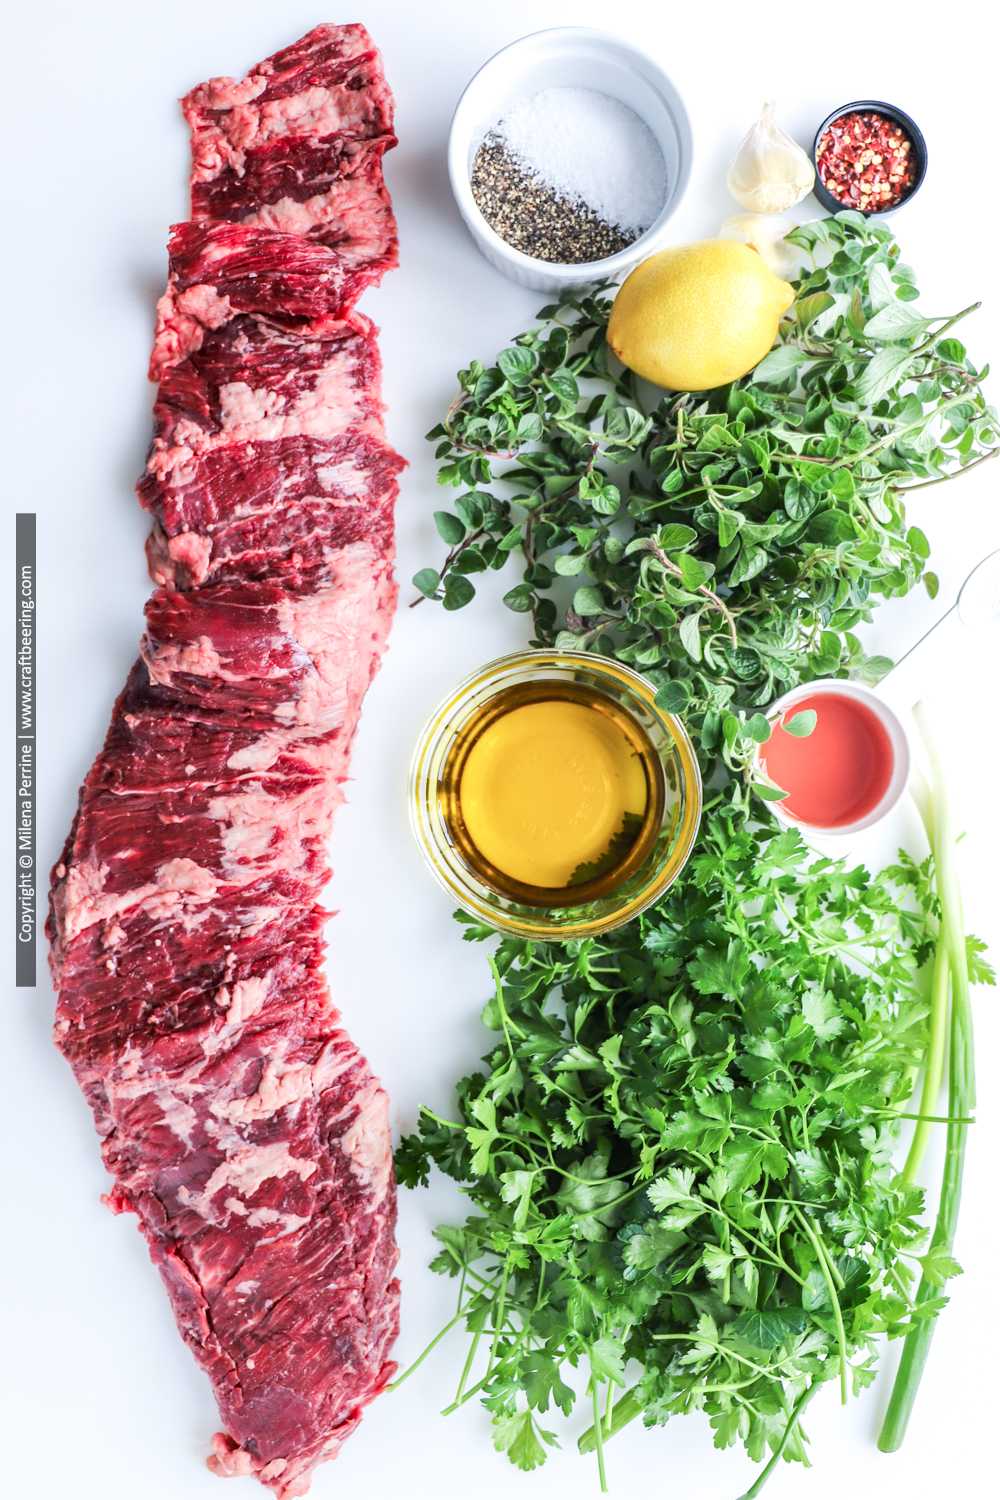 Raw outside skirt steak with herbs and other ingredients for chimichurri - the making of entrana a la parilla.